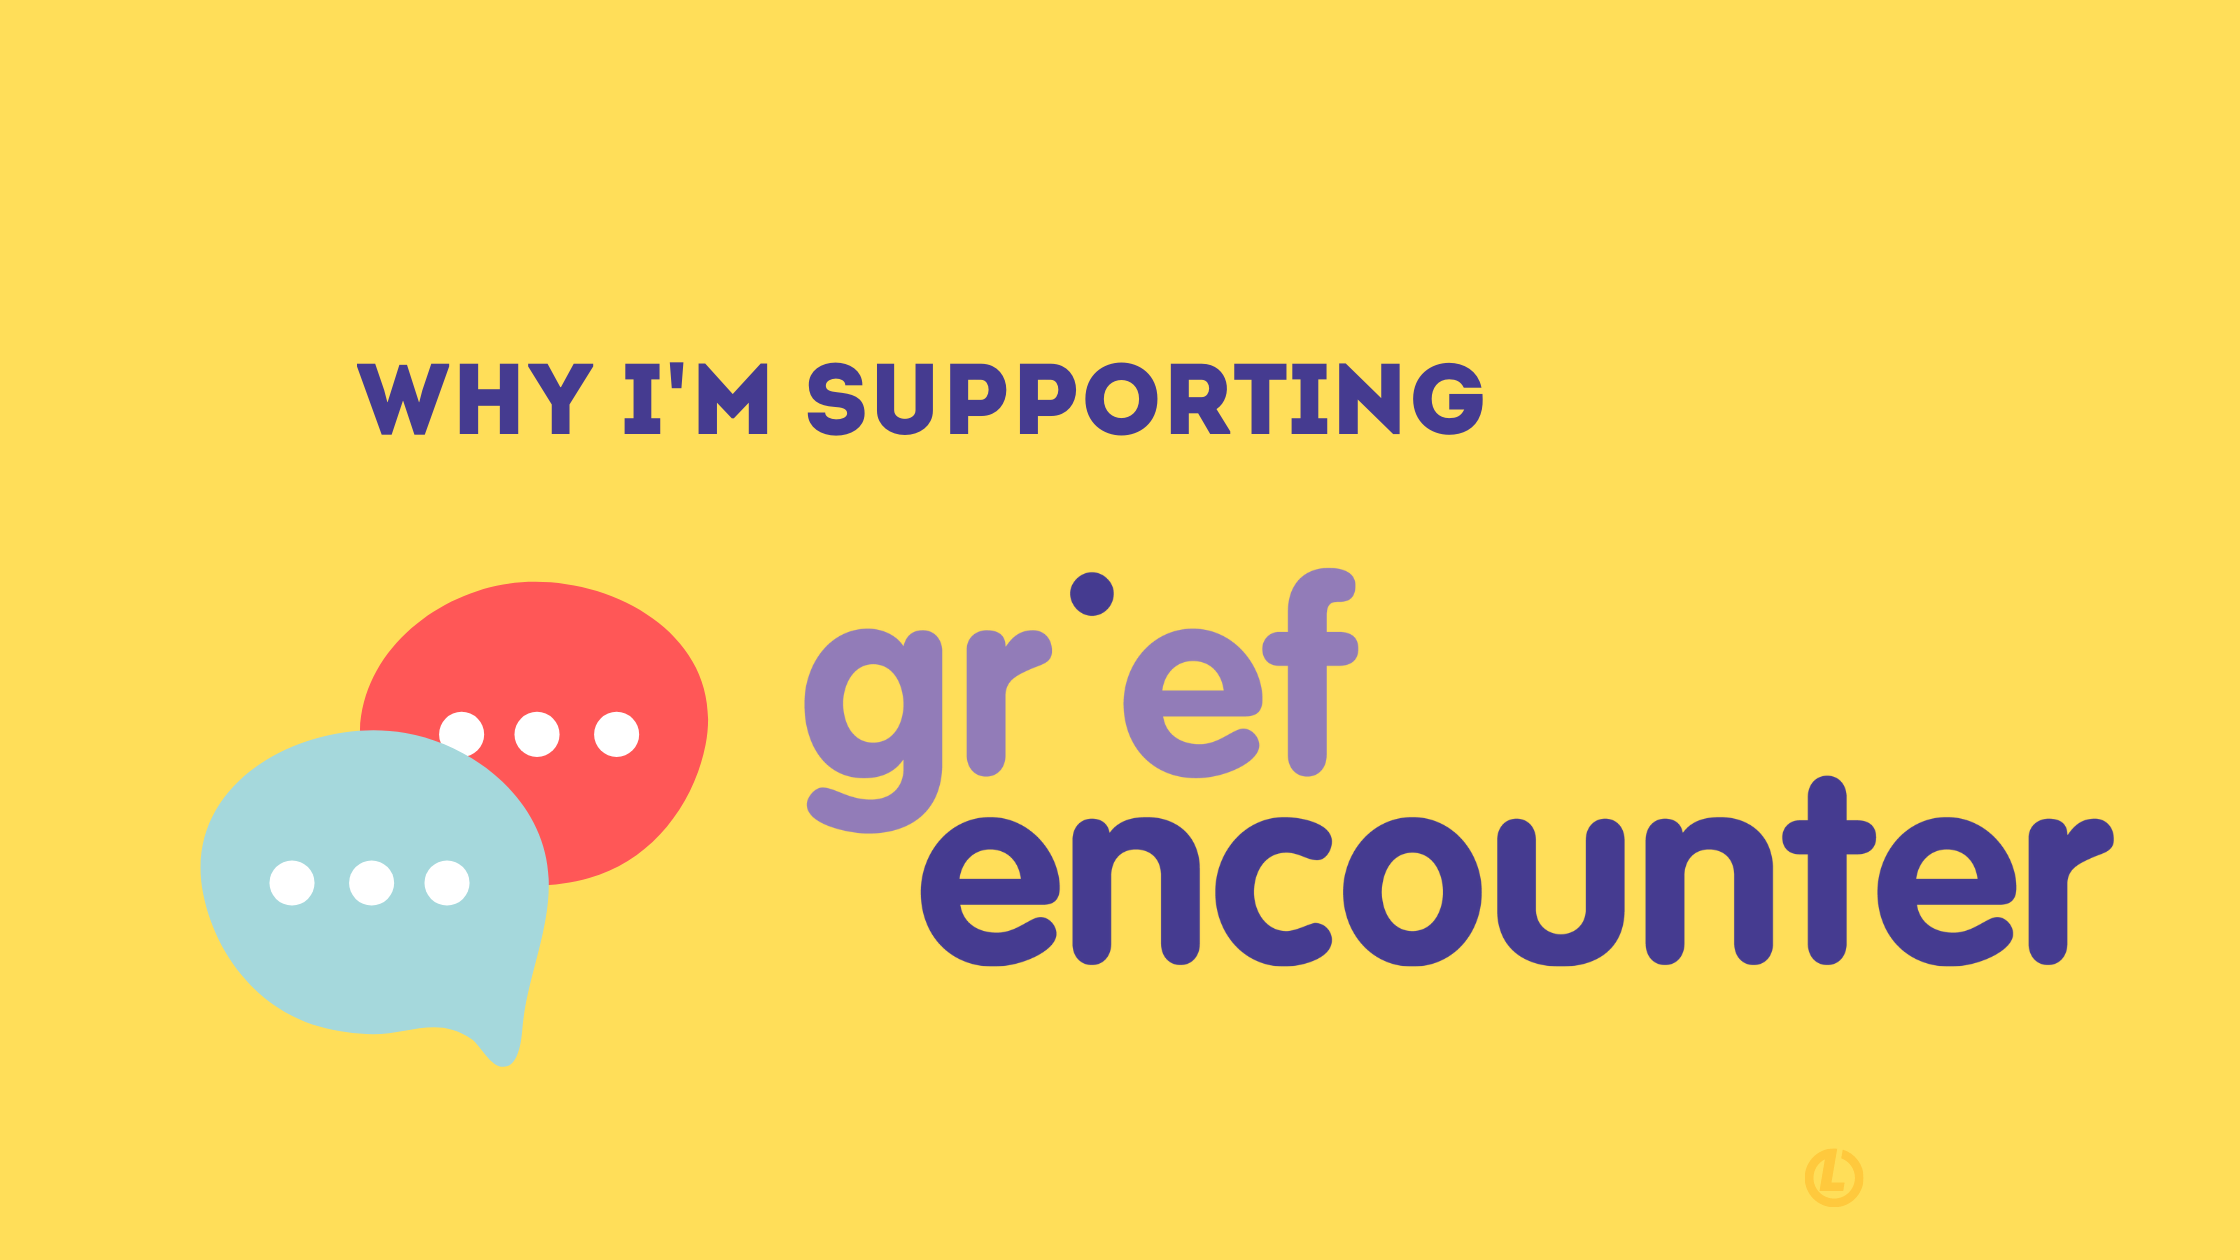 Why I'm Supporting Grief Encounter